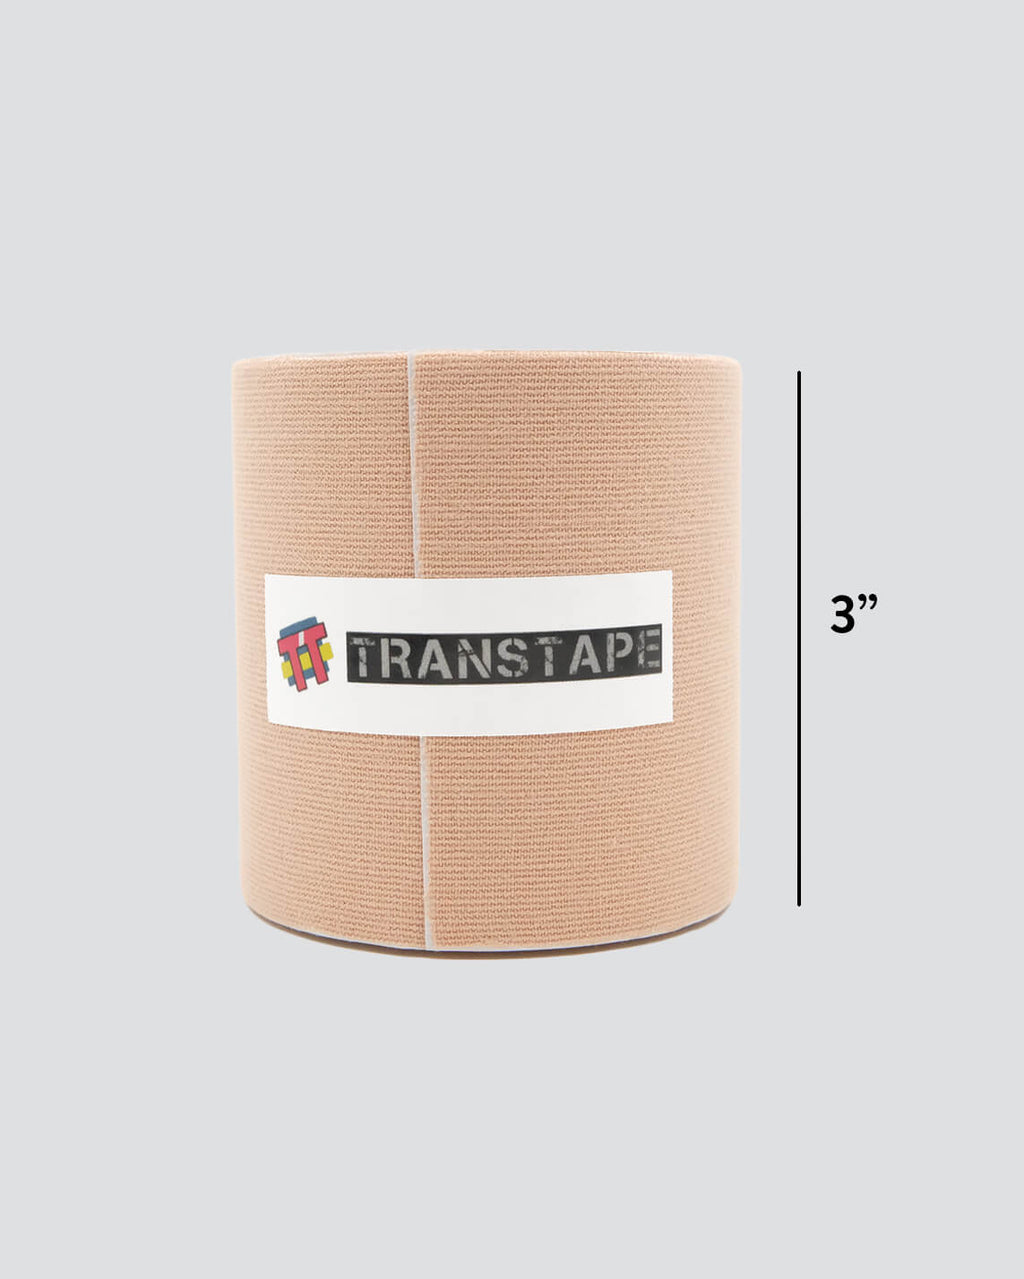 BINDING WITH TRANSTAPE – Transtape, Trans Tape For Chest Binding